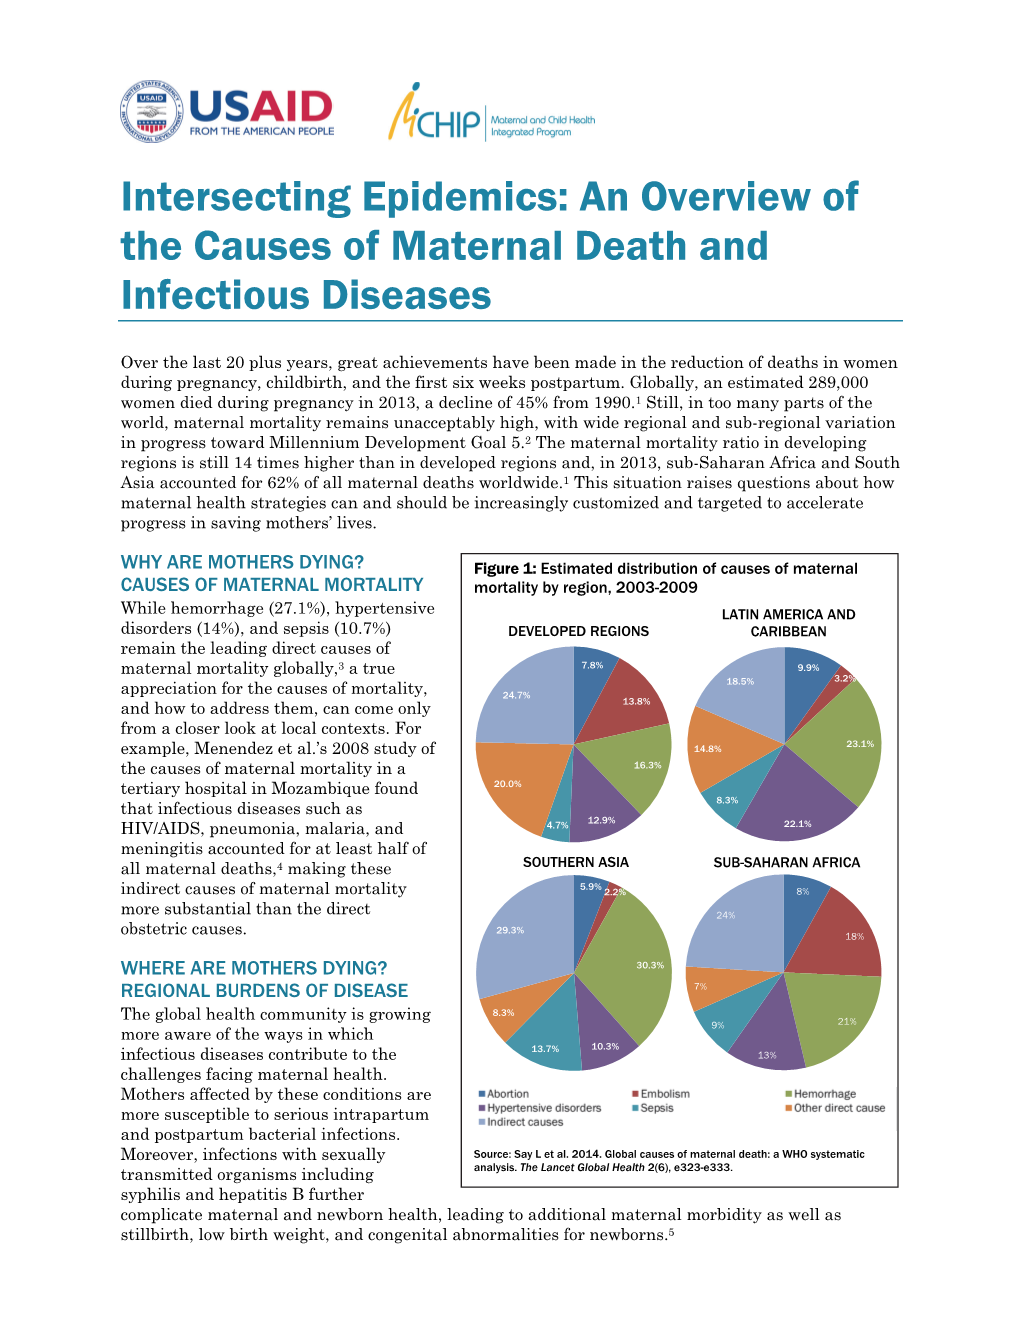 Intersecting Epidemics: an Overview of the Causes of Maternal Death and Infectious Diseases